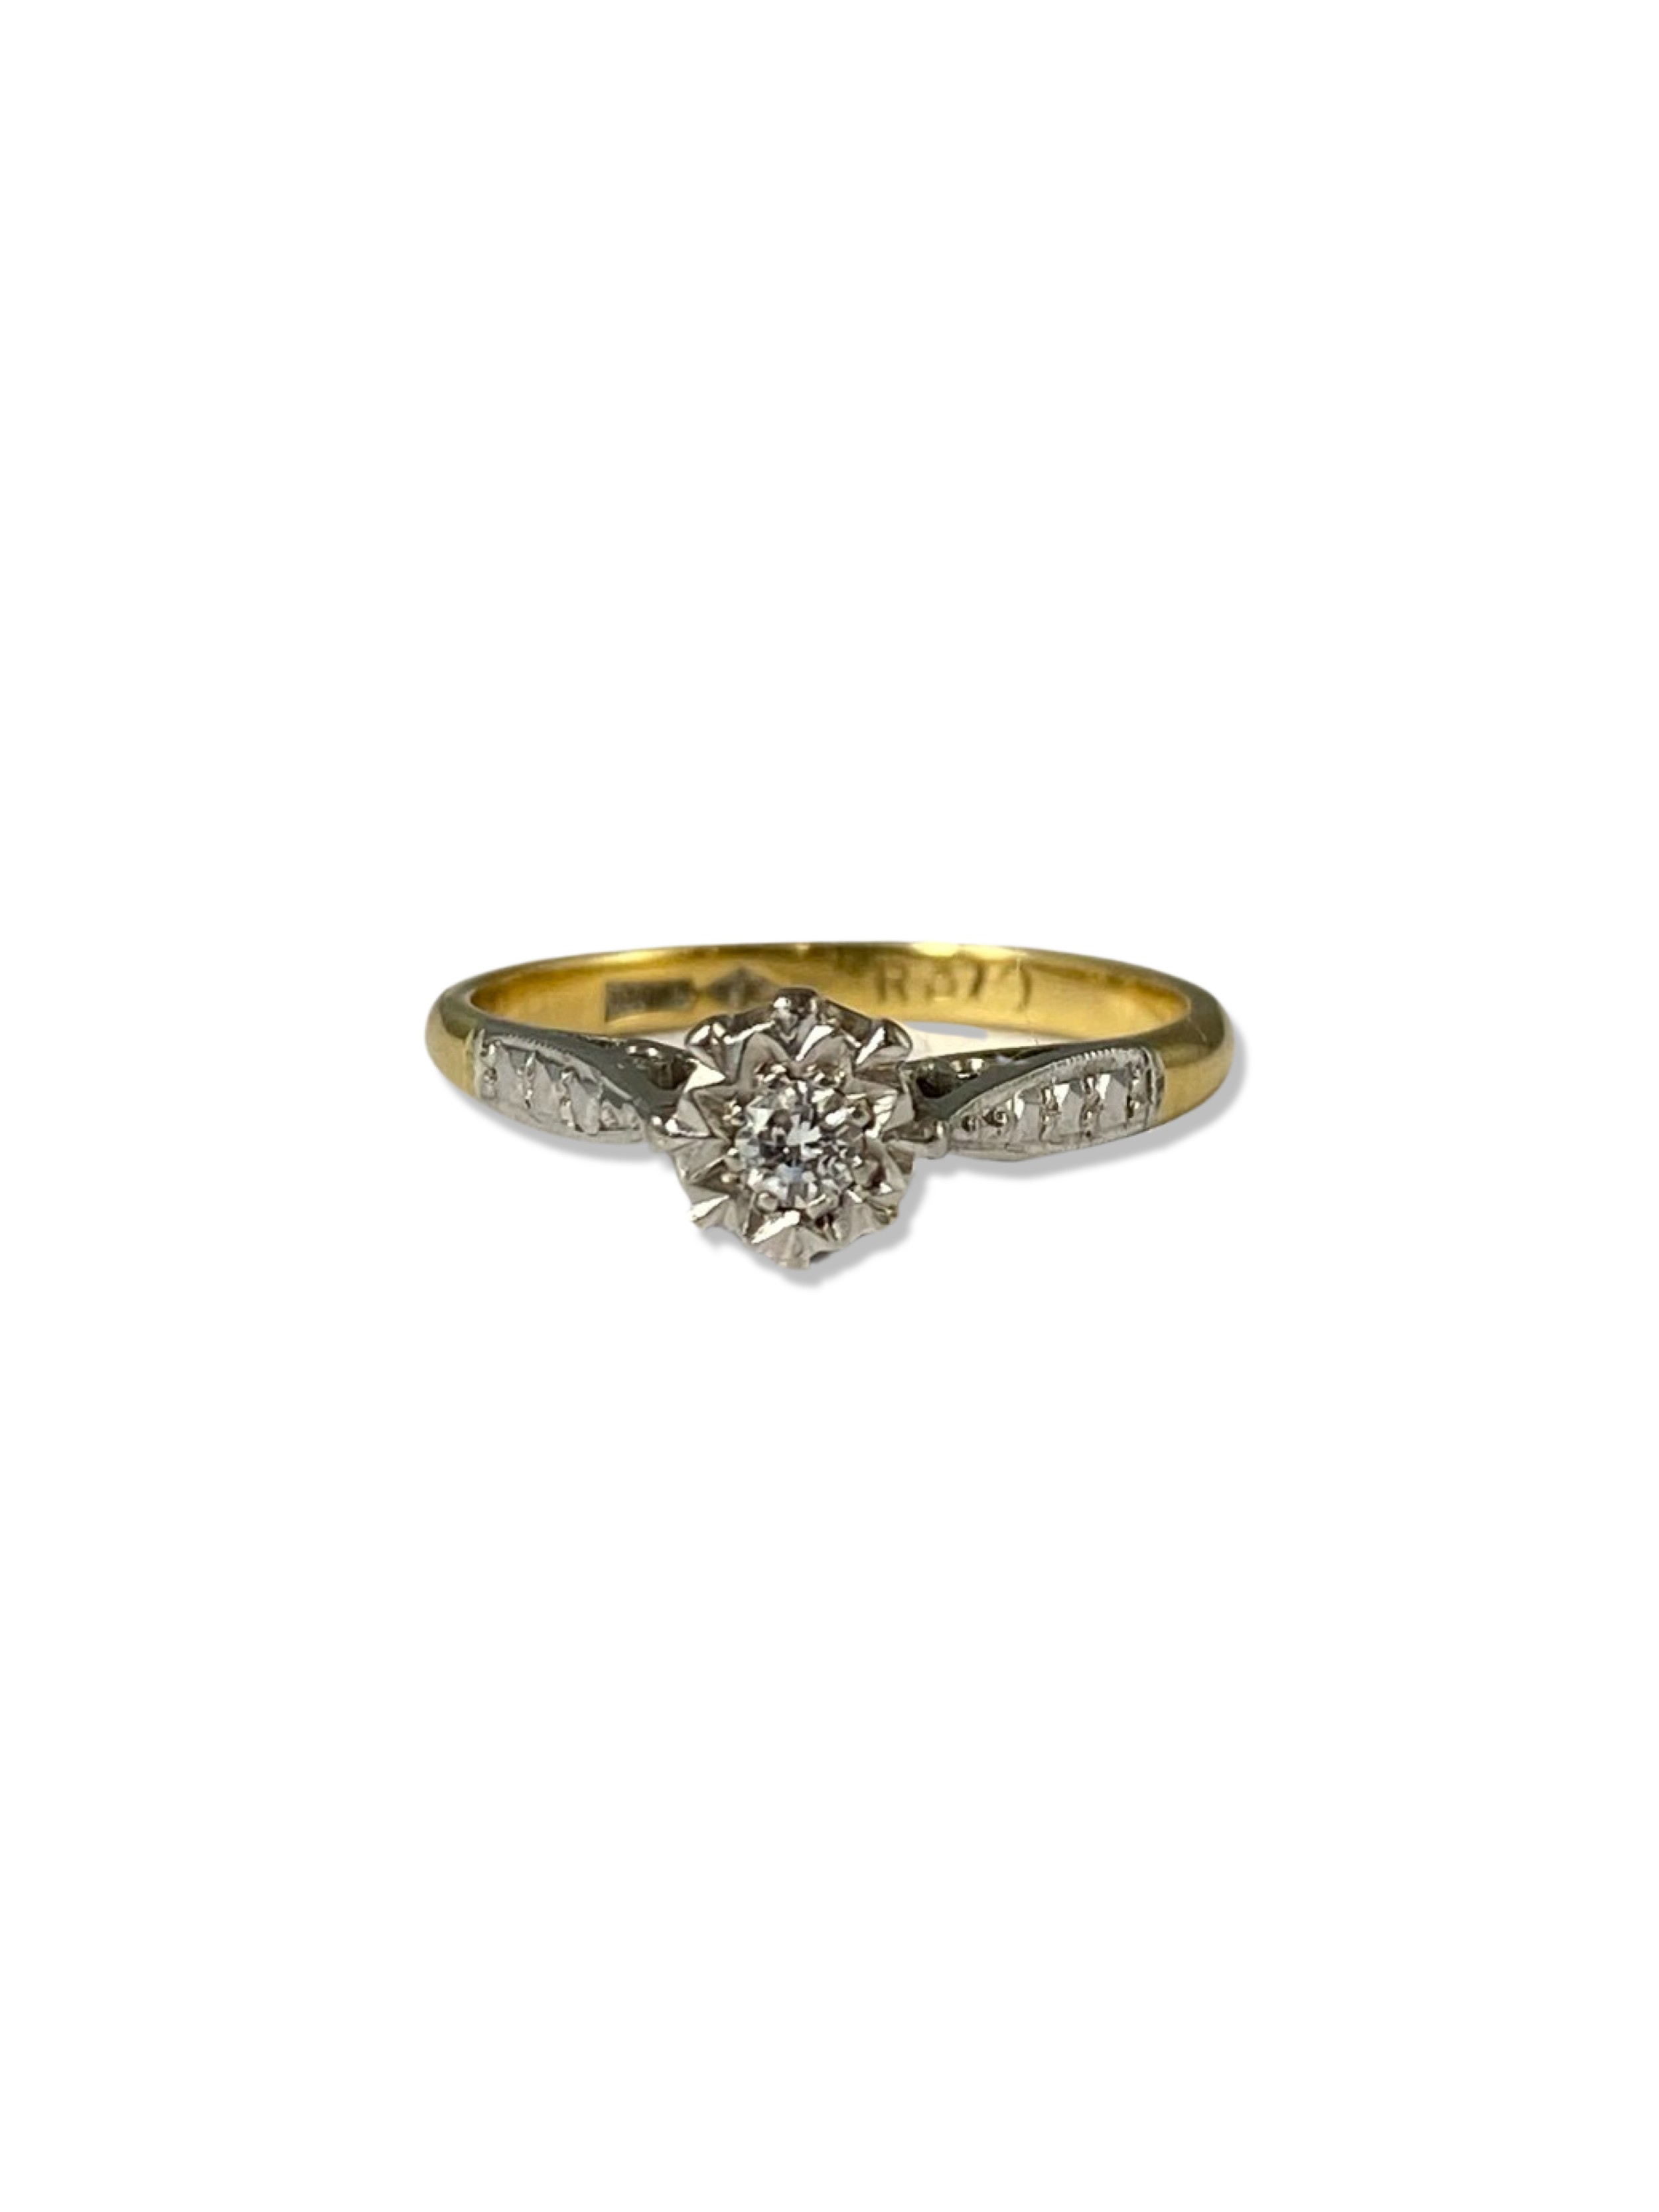 18ct Gold Two-Tone Diamond Solitaire Ring with Diamond Shoulders weighing 2.24 grams size J 1/2